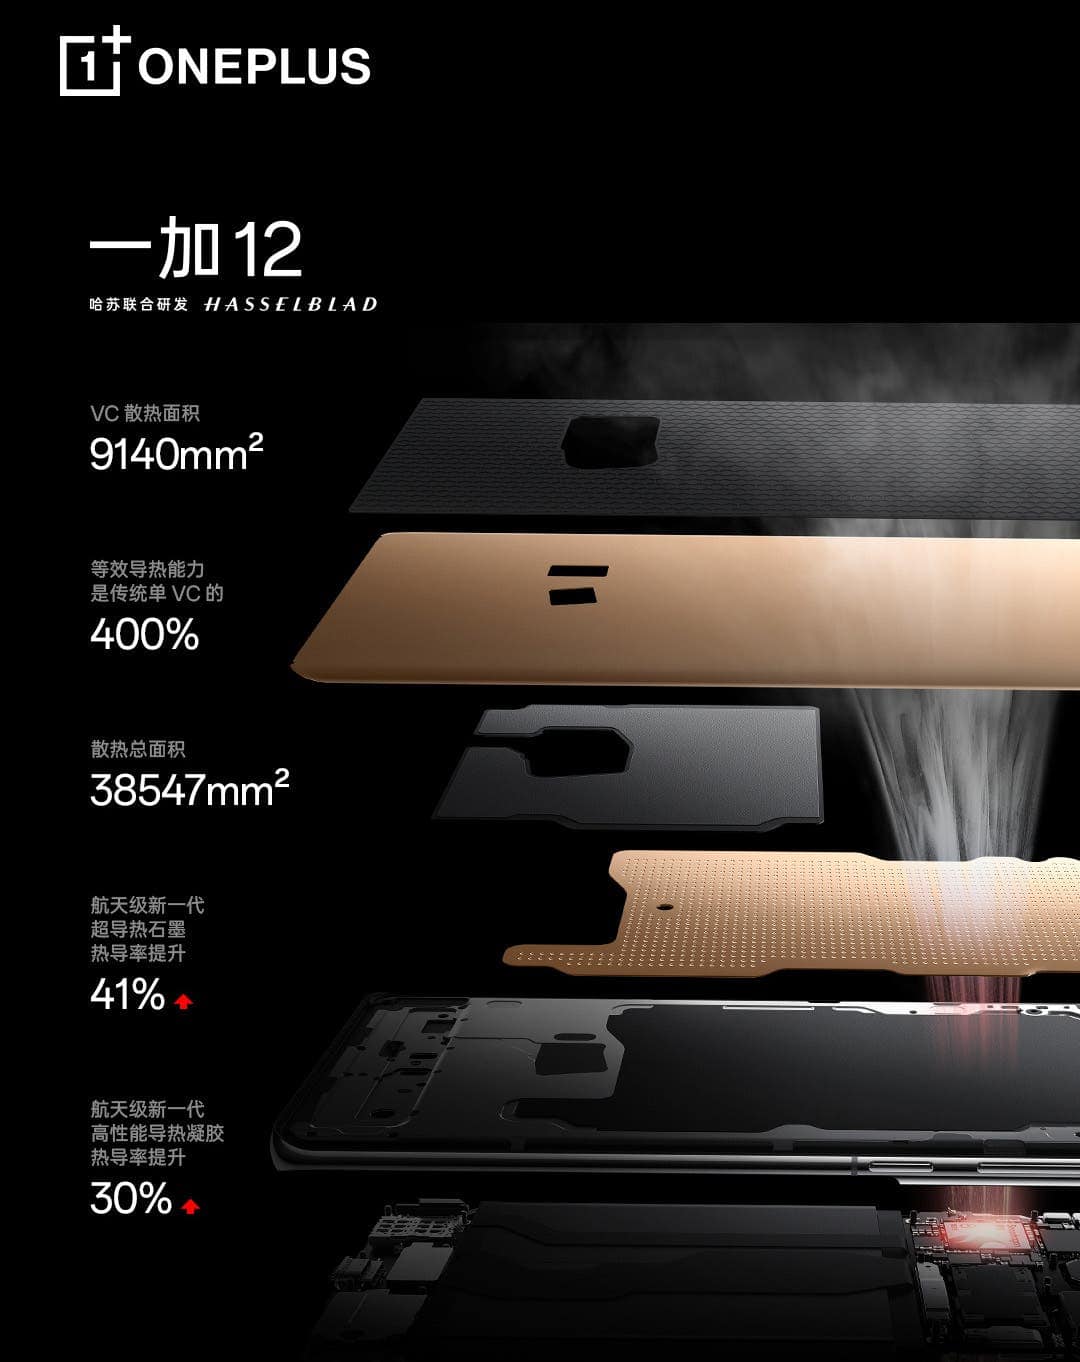 Stable Gaming: OnePlus 12 Sports a Massive Vapor Chamber System